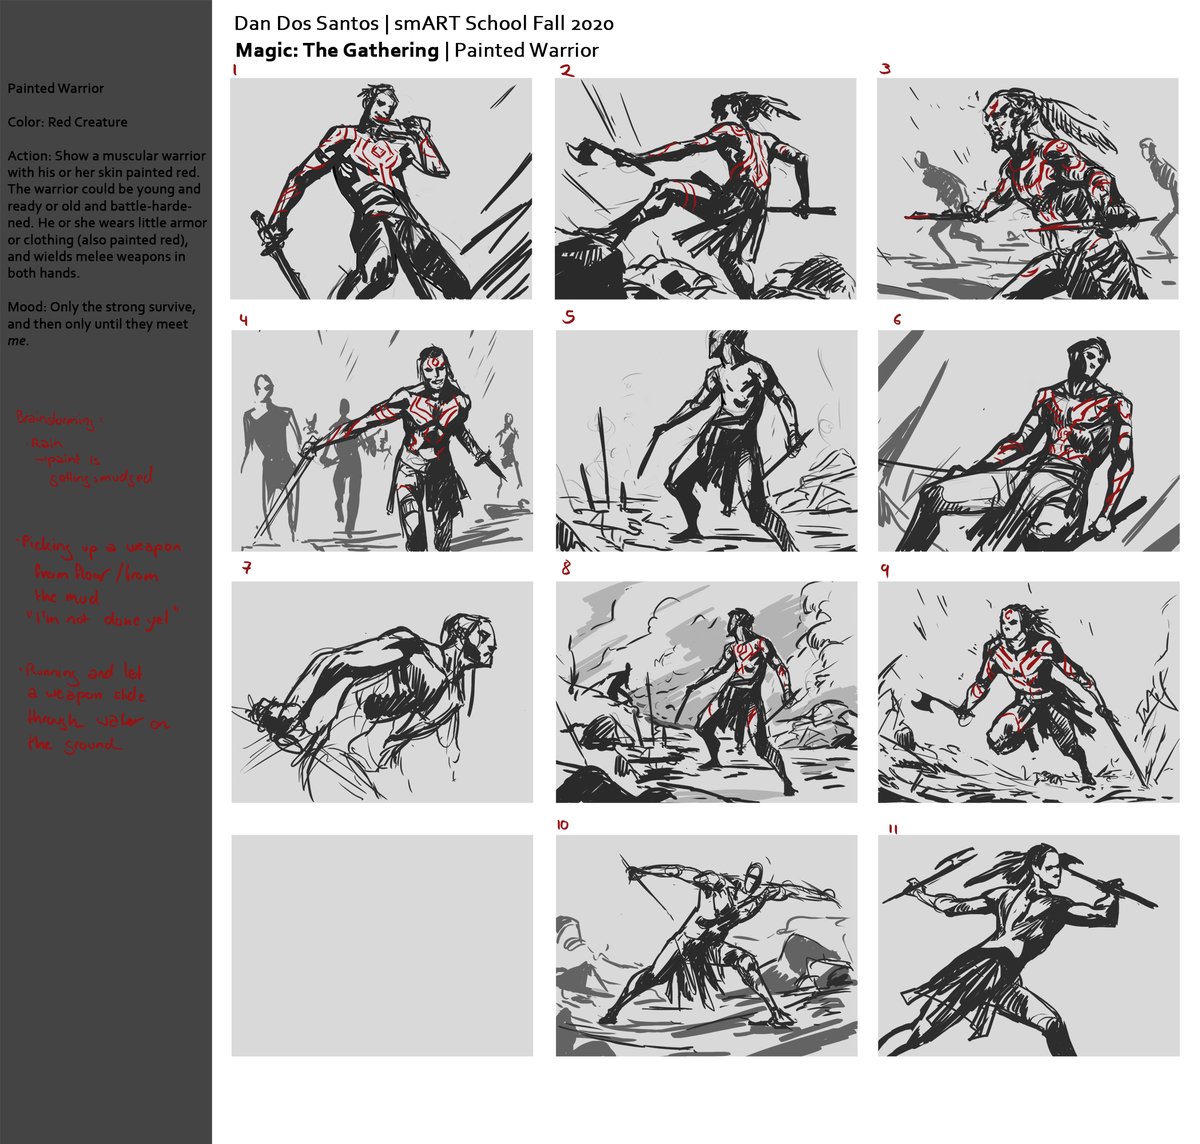 I had these thumbnails still floating around from last SAS semester, and picked them up again for a bit of practice 